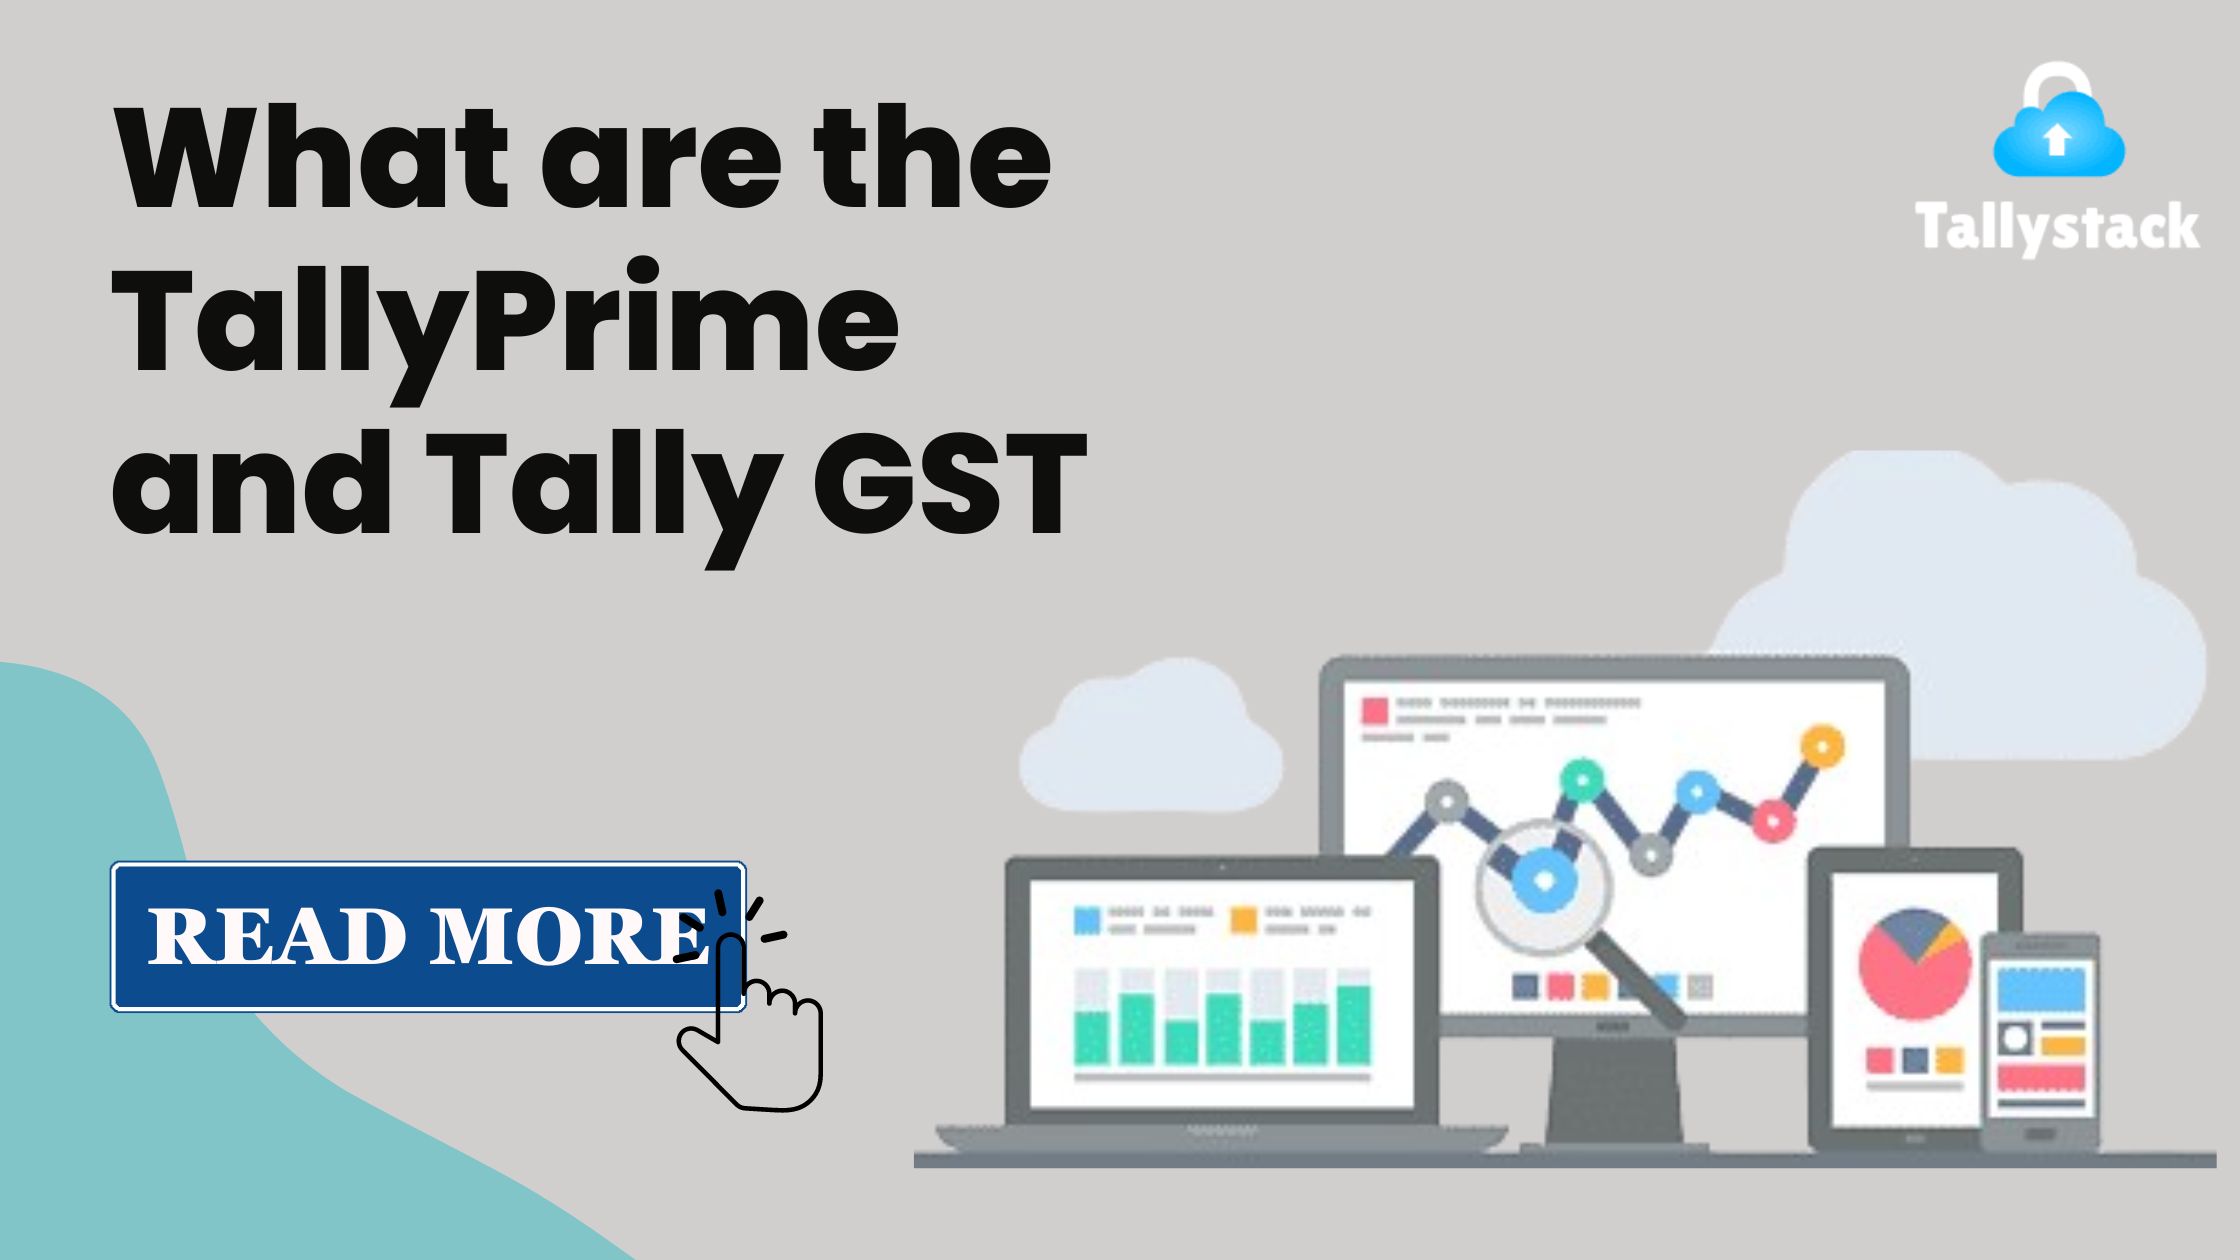 TallyPrime makes it simple to create invoices for goods and services that comply with GST requirements.